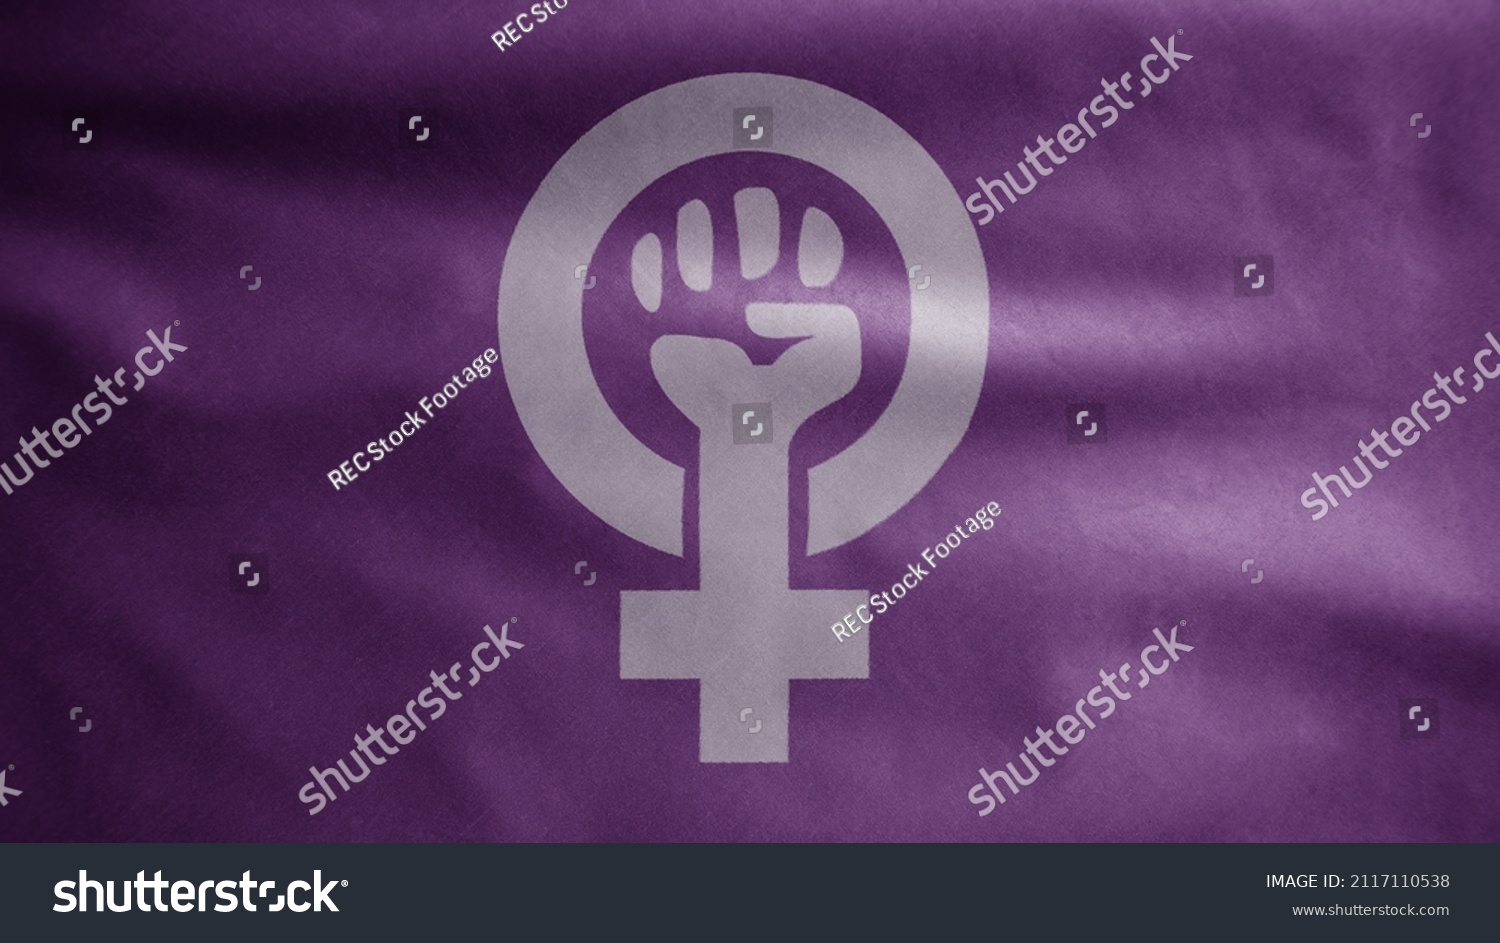 Women resist symbol with purple flag waving on wind. Girl power fist illustration background. Hand drawn feminism motivational slogan isolated. Human arm with clenched fingers. #2117110538